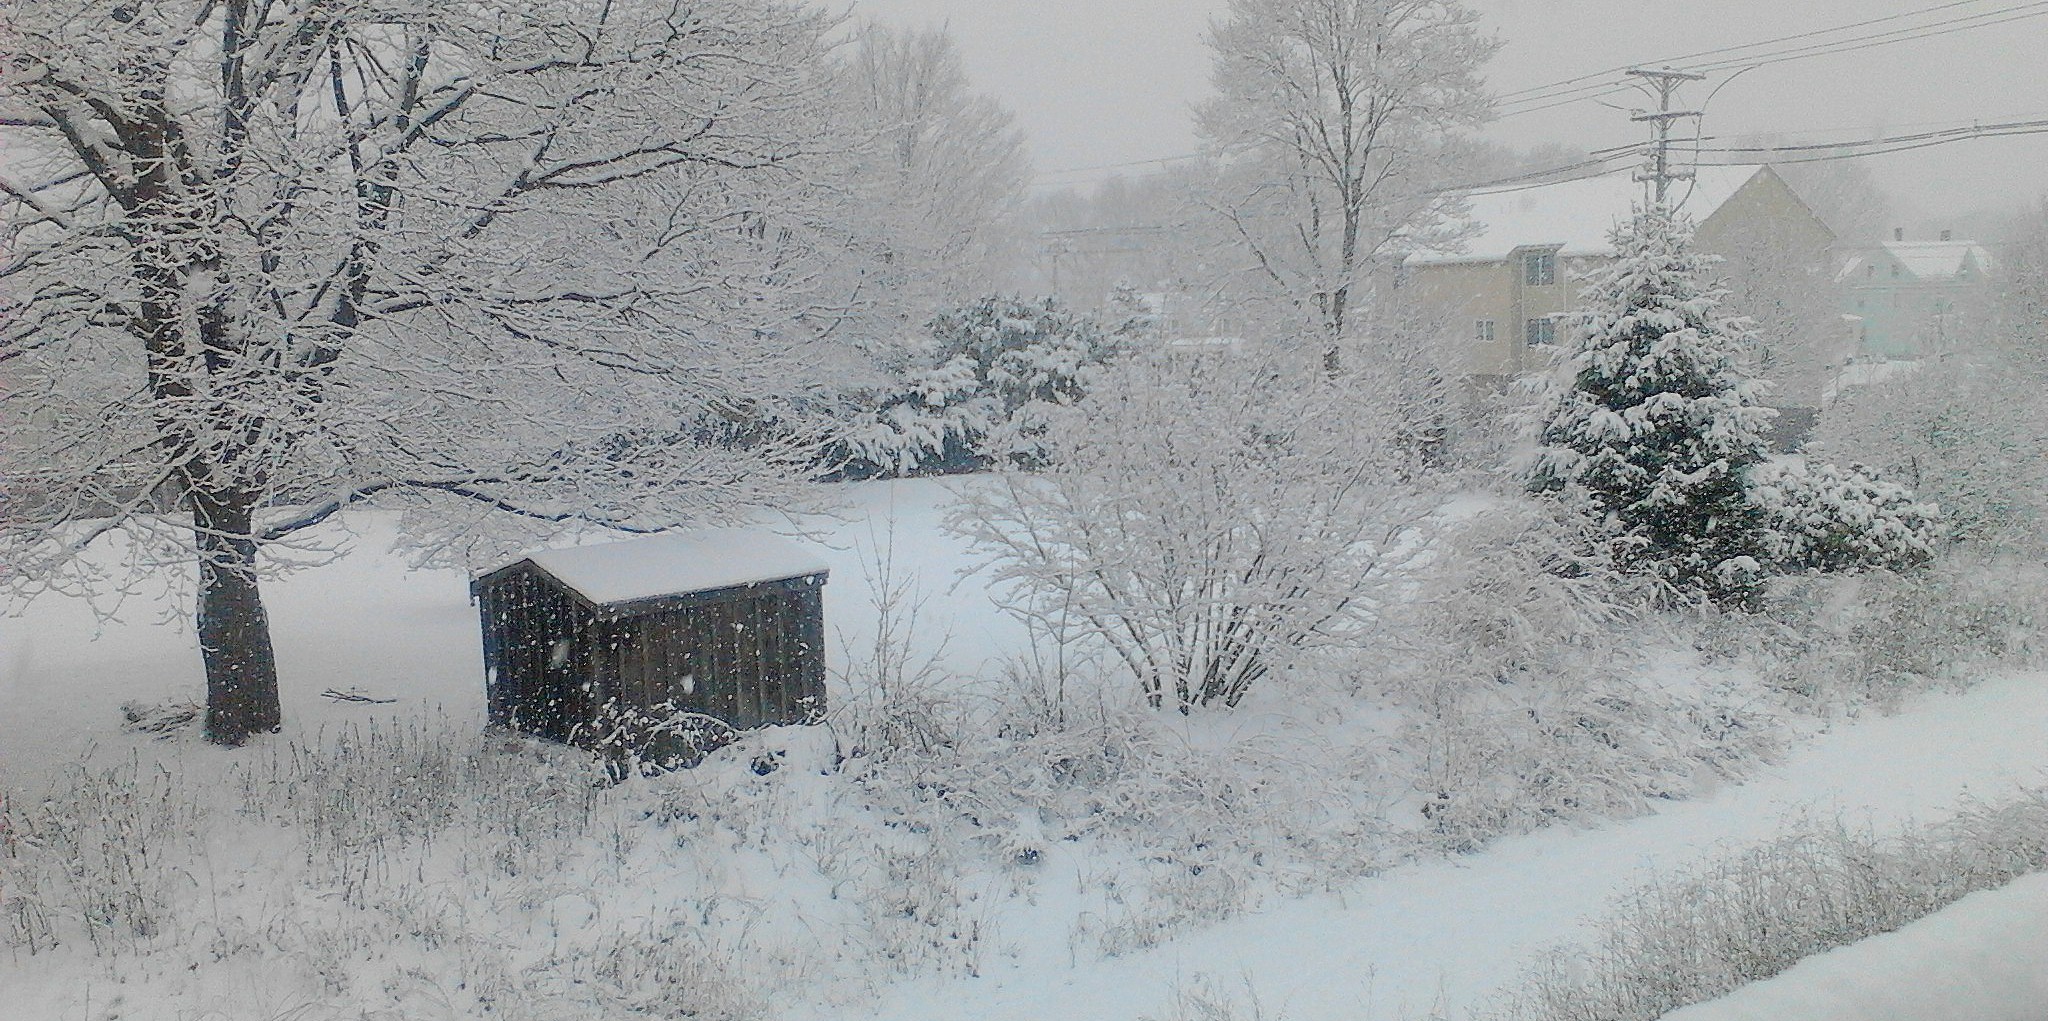 Snow on a rustic shed, Photo by Anja